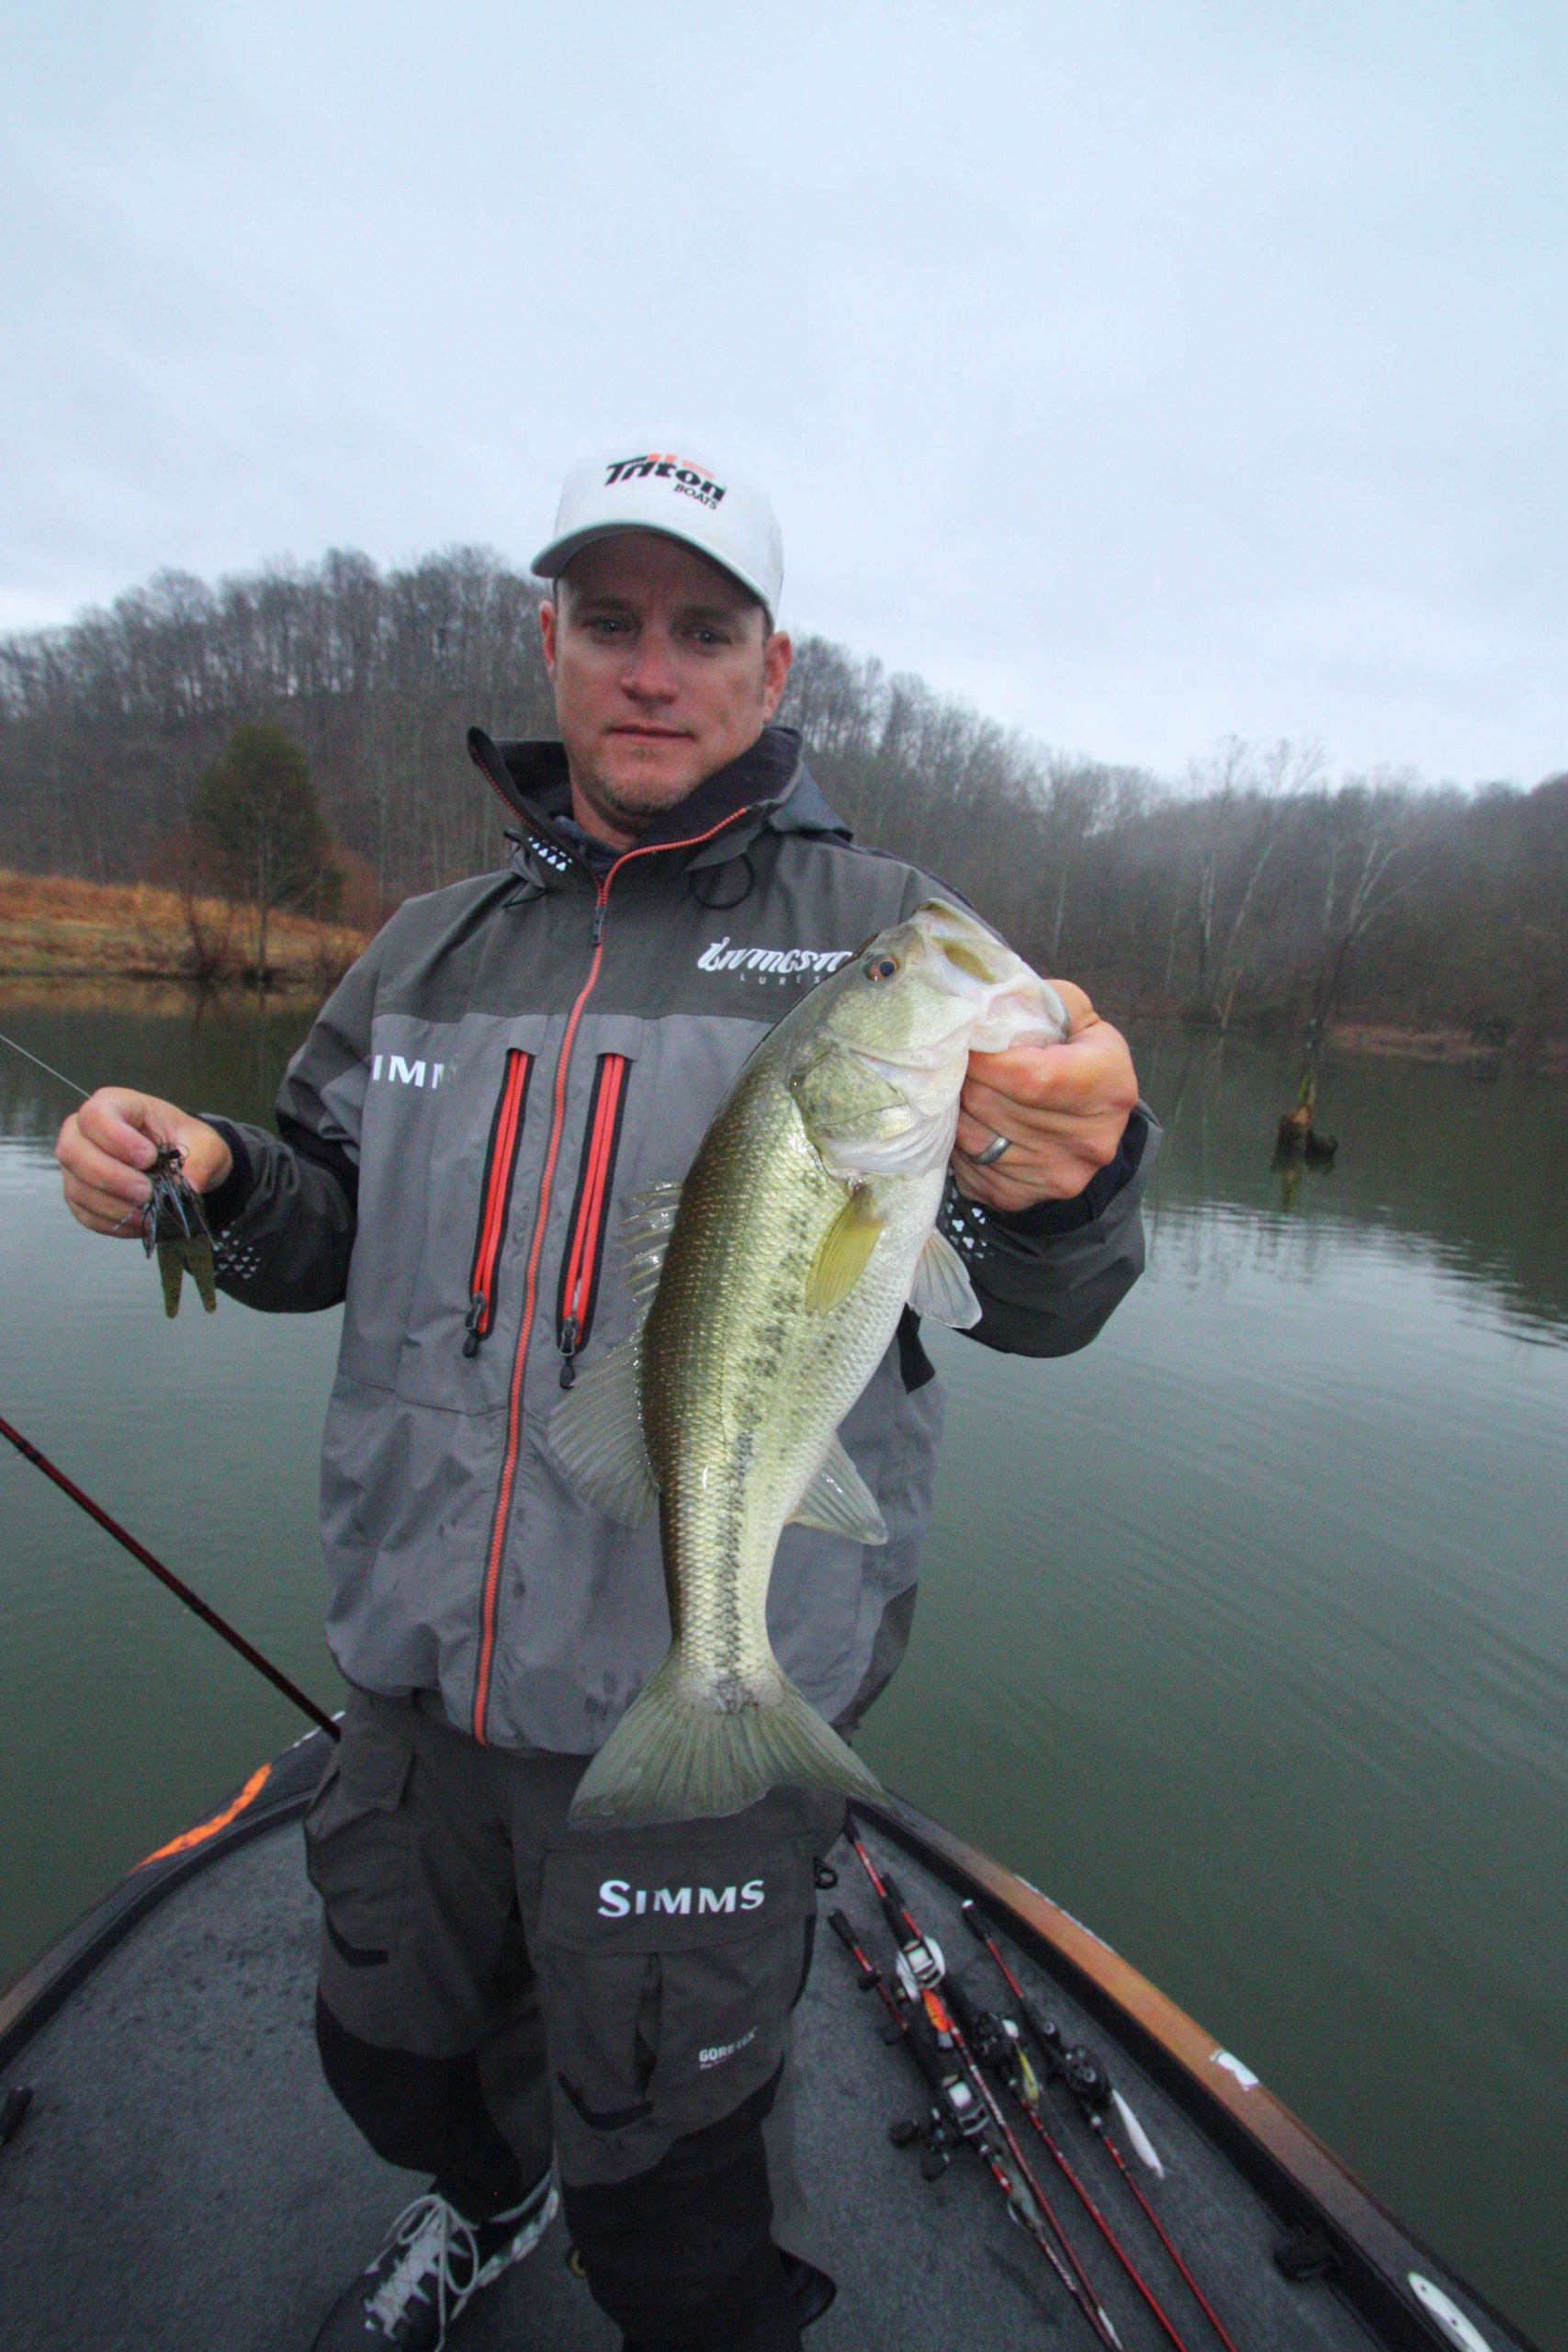 8:16 a.m. Cherry catches a 2-pound, 3-ounce largemouth off a laydown tree on a jig.